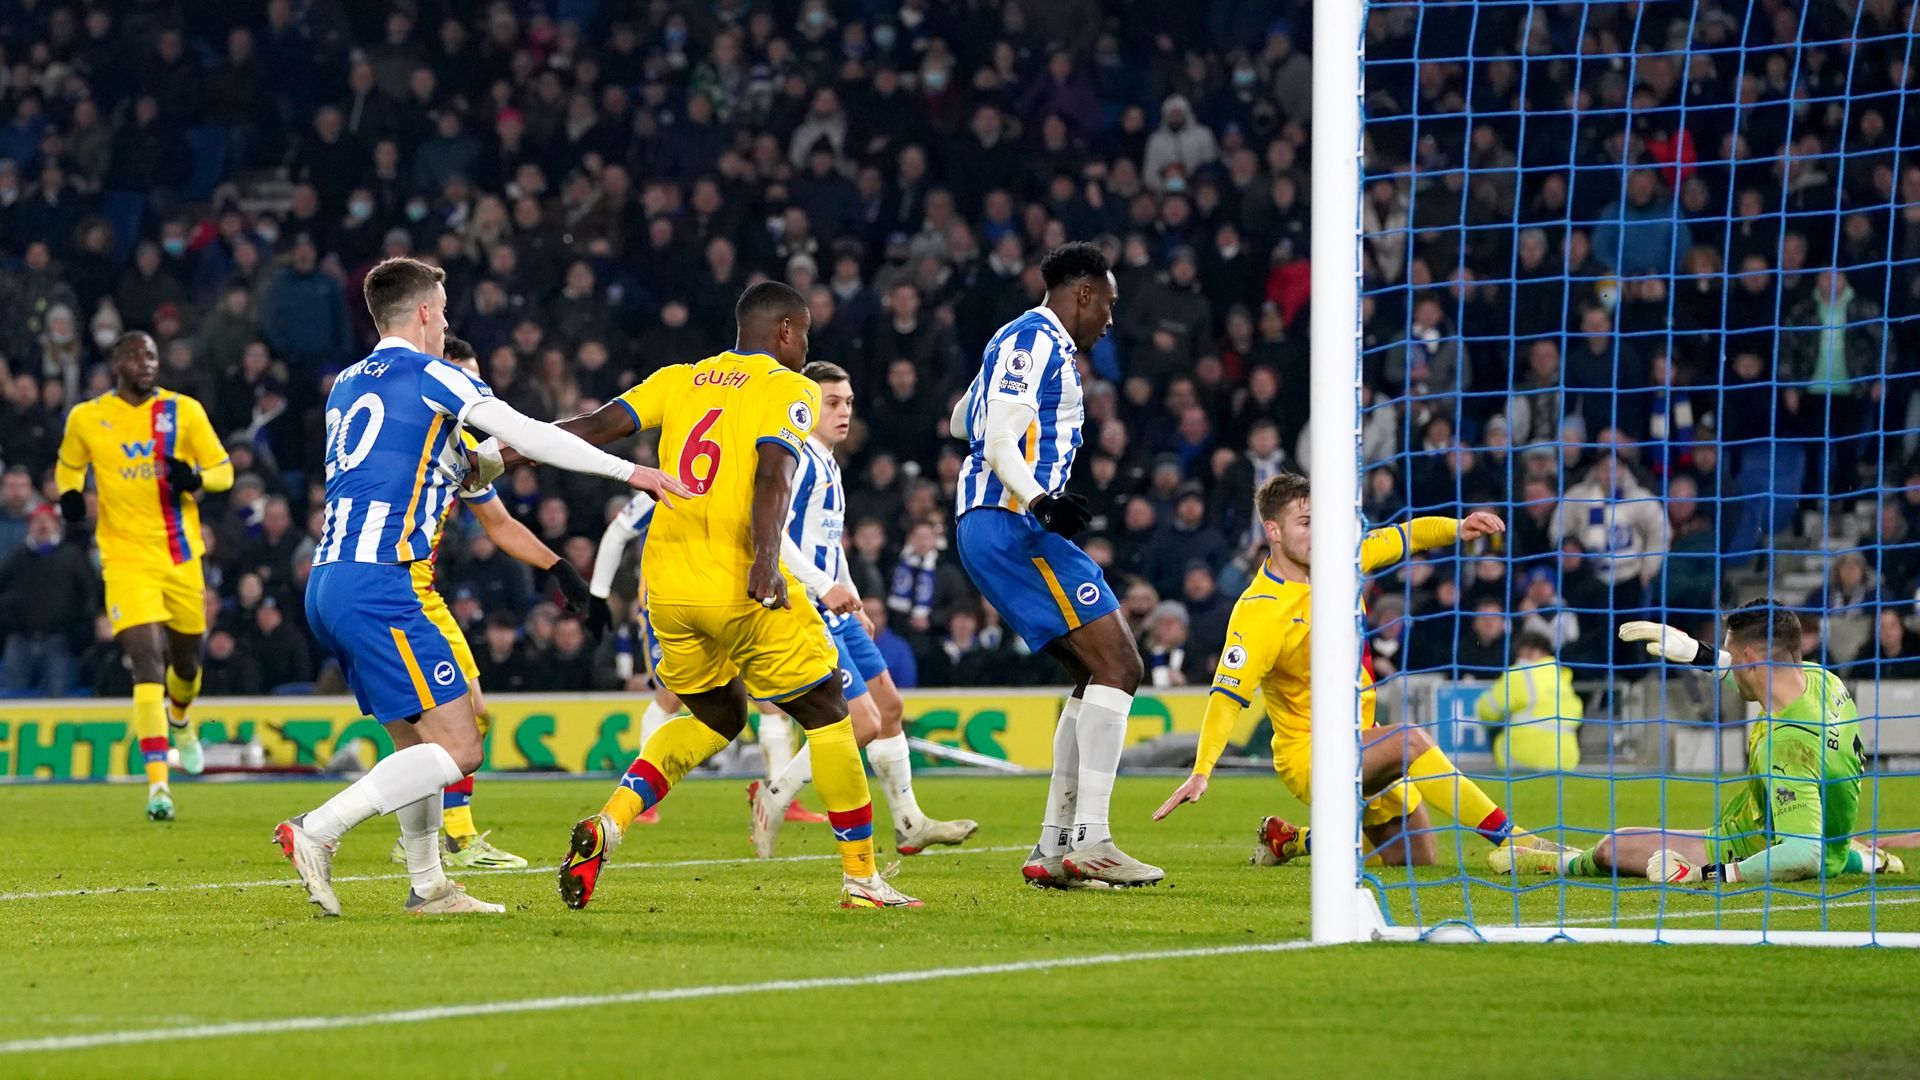 Dominant Brighton rescue late draw against Palace